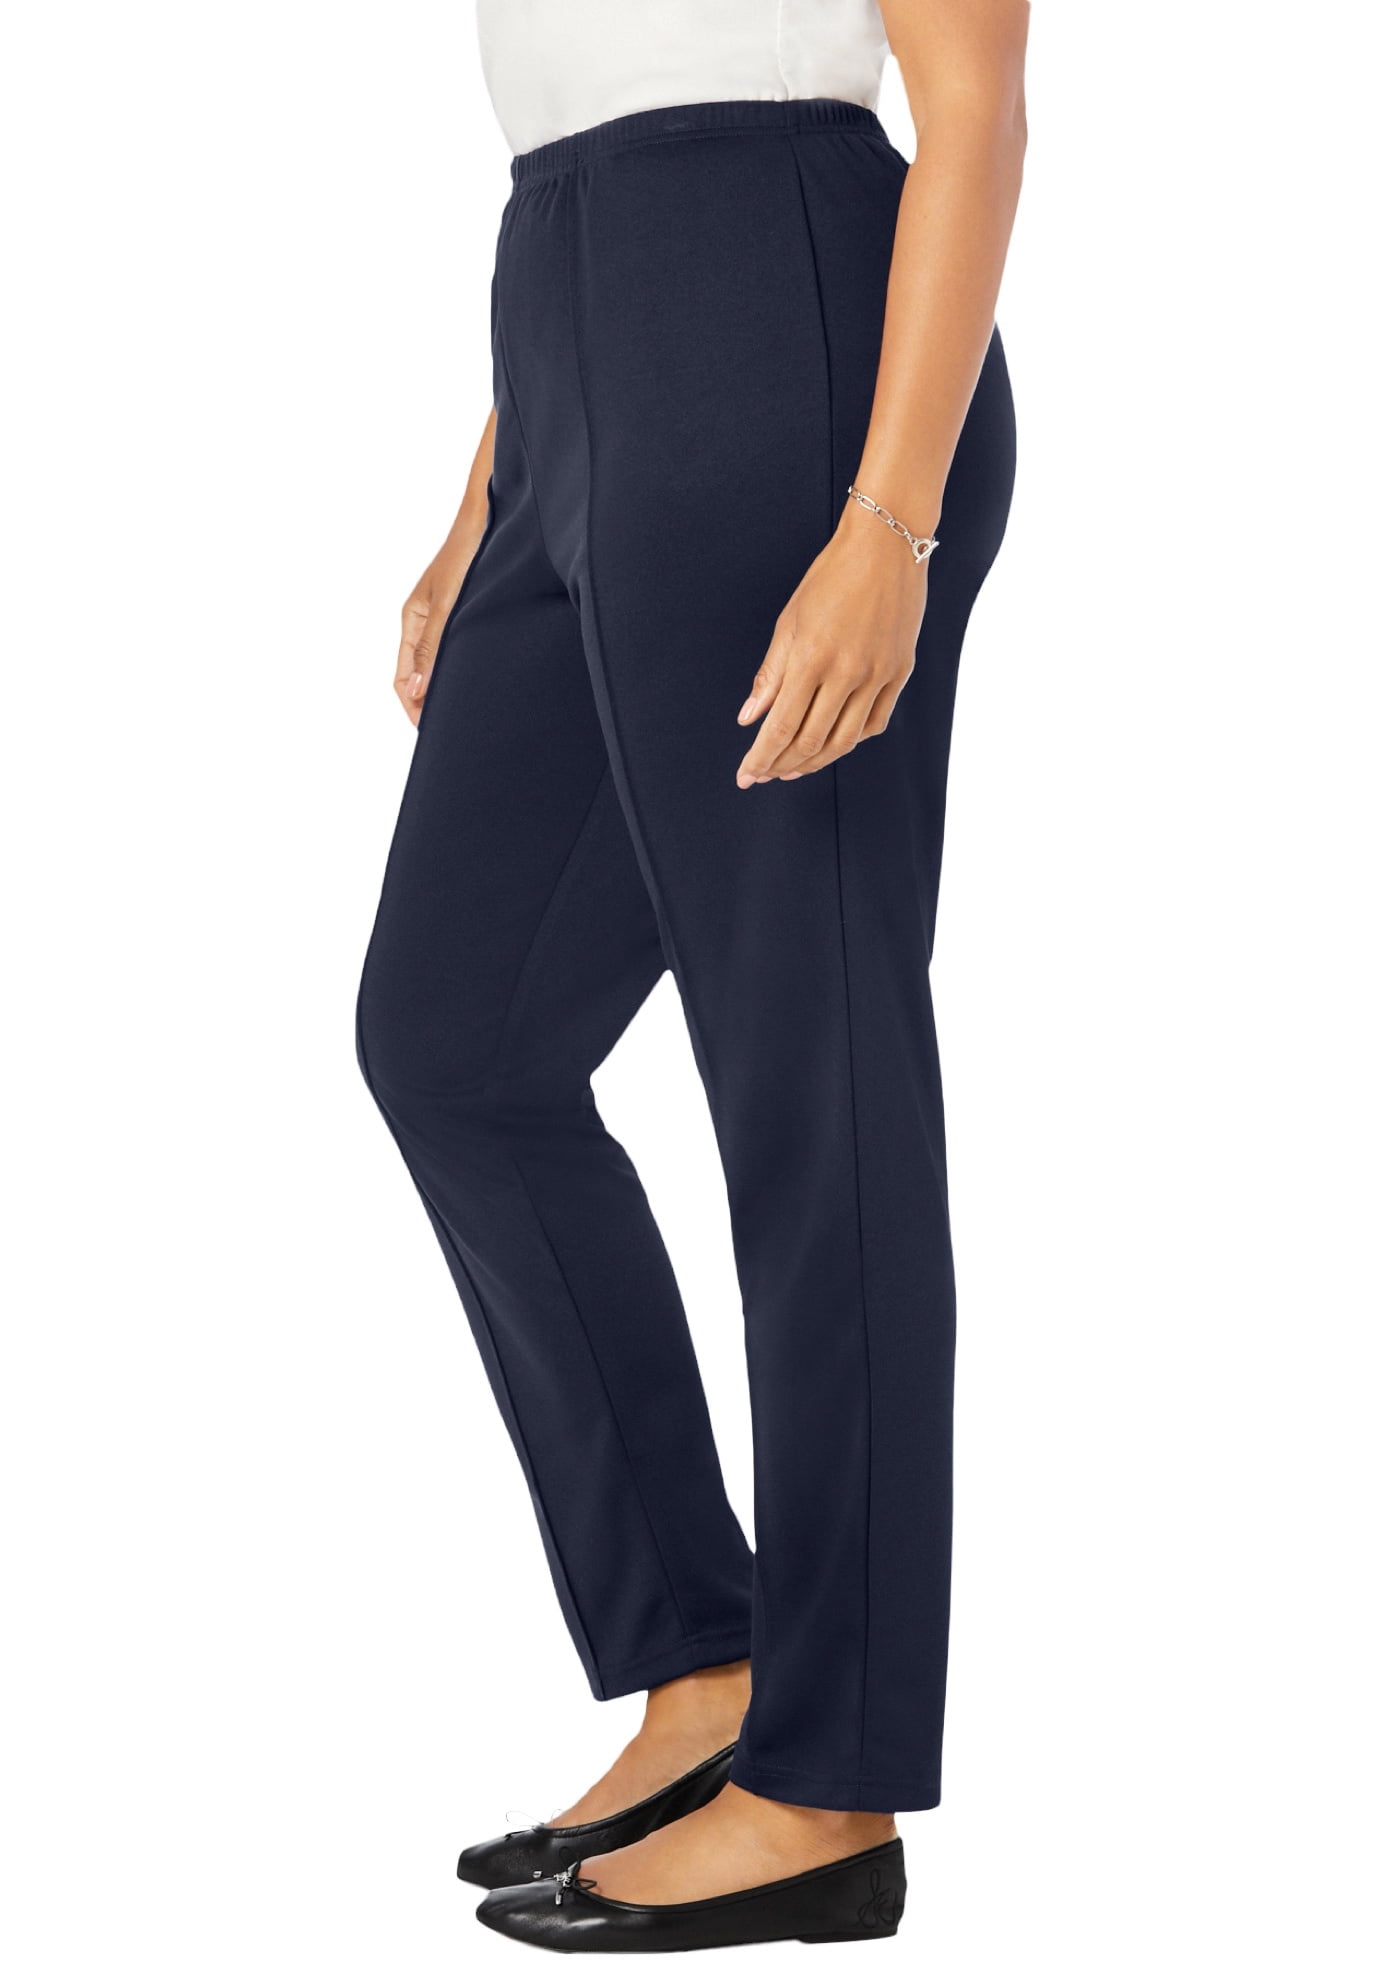 Knit Pant With Monogram Band - Women - Ready-to-Wear